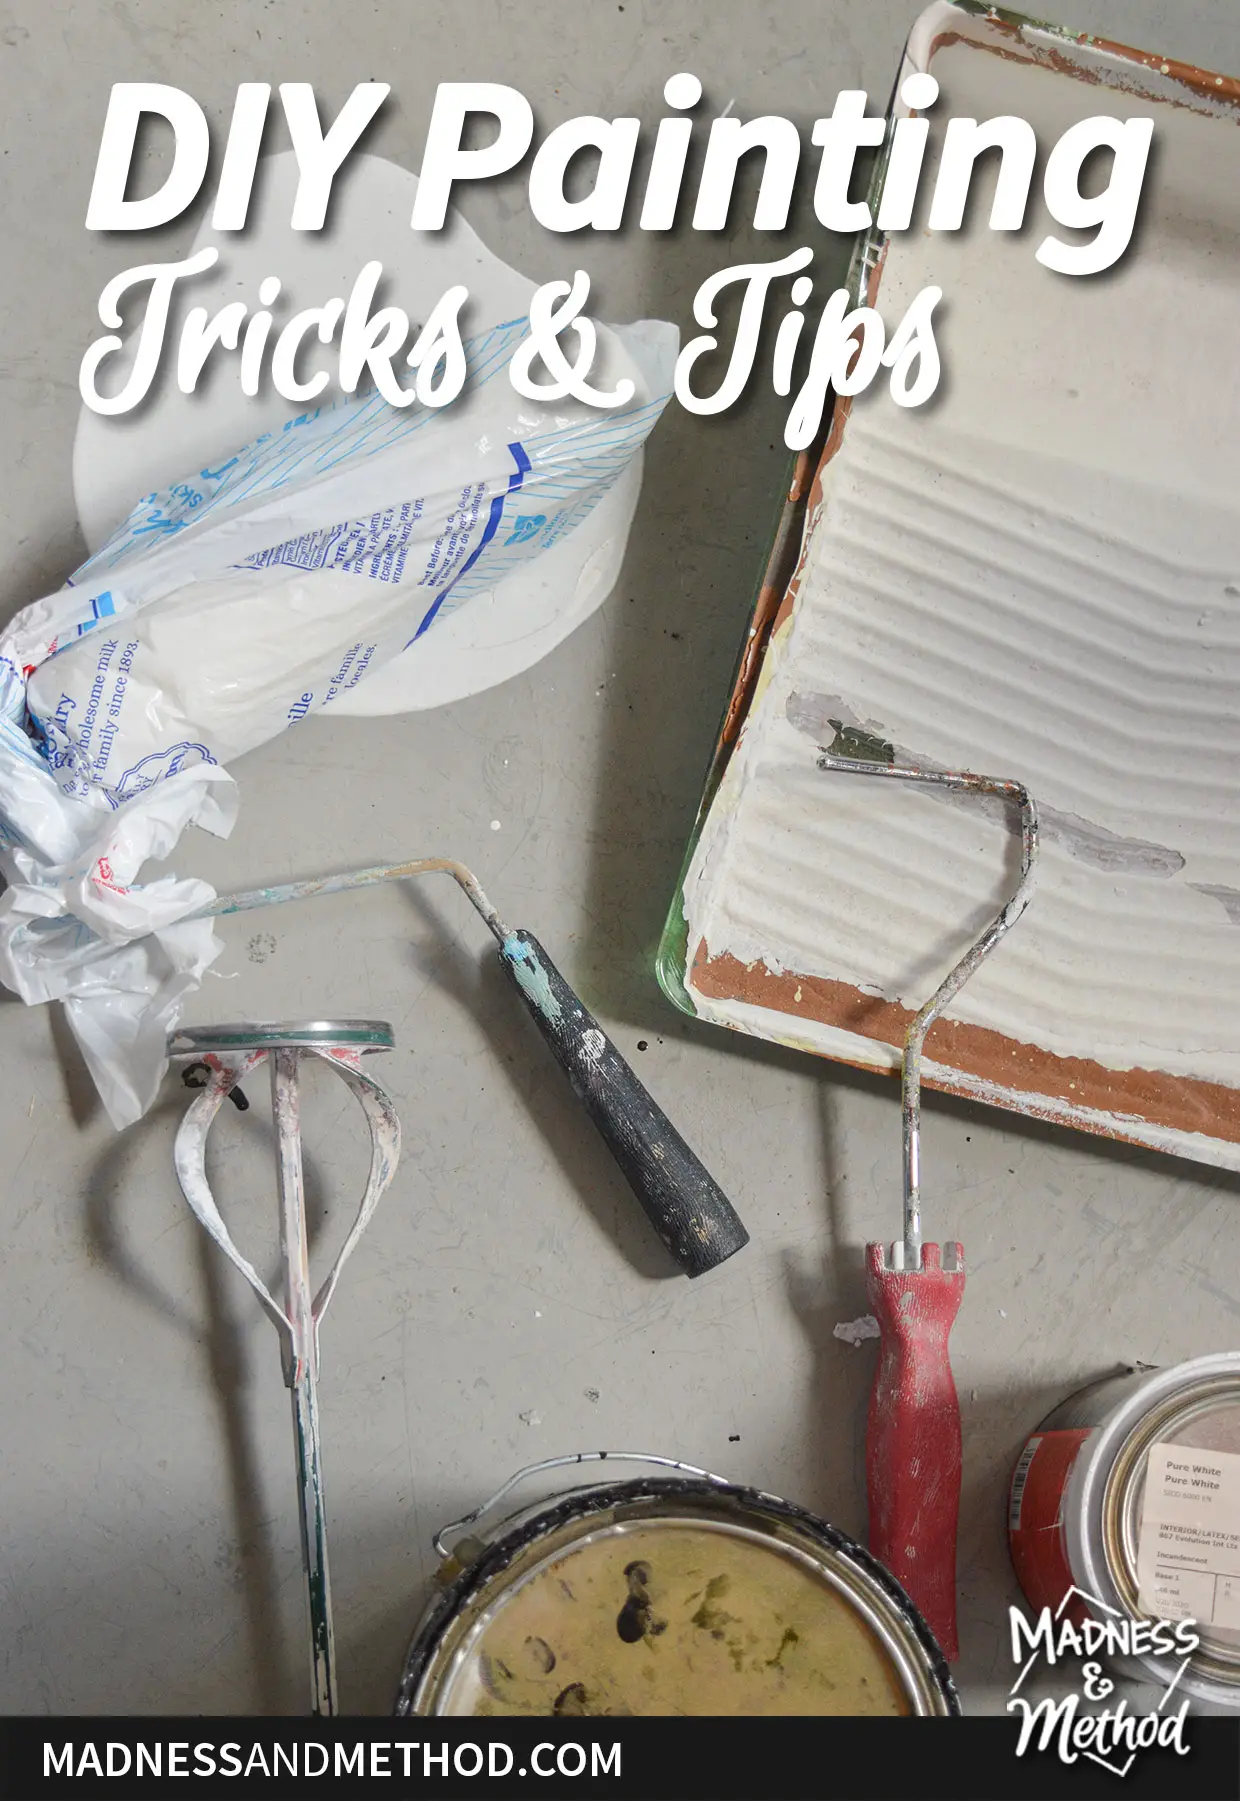 diy painting tricks and tips text overlay with paint supplies